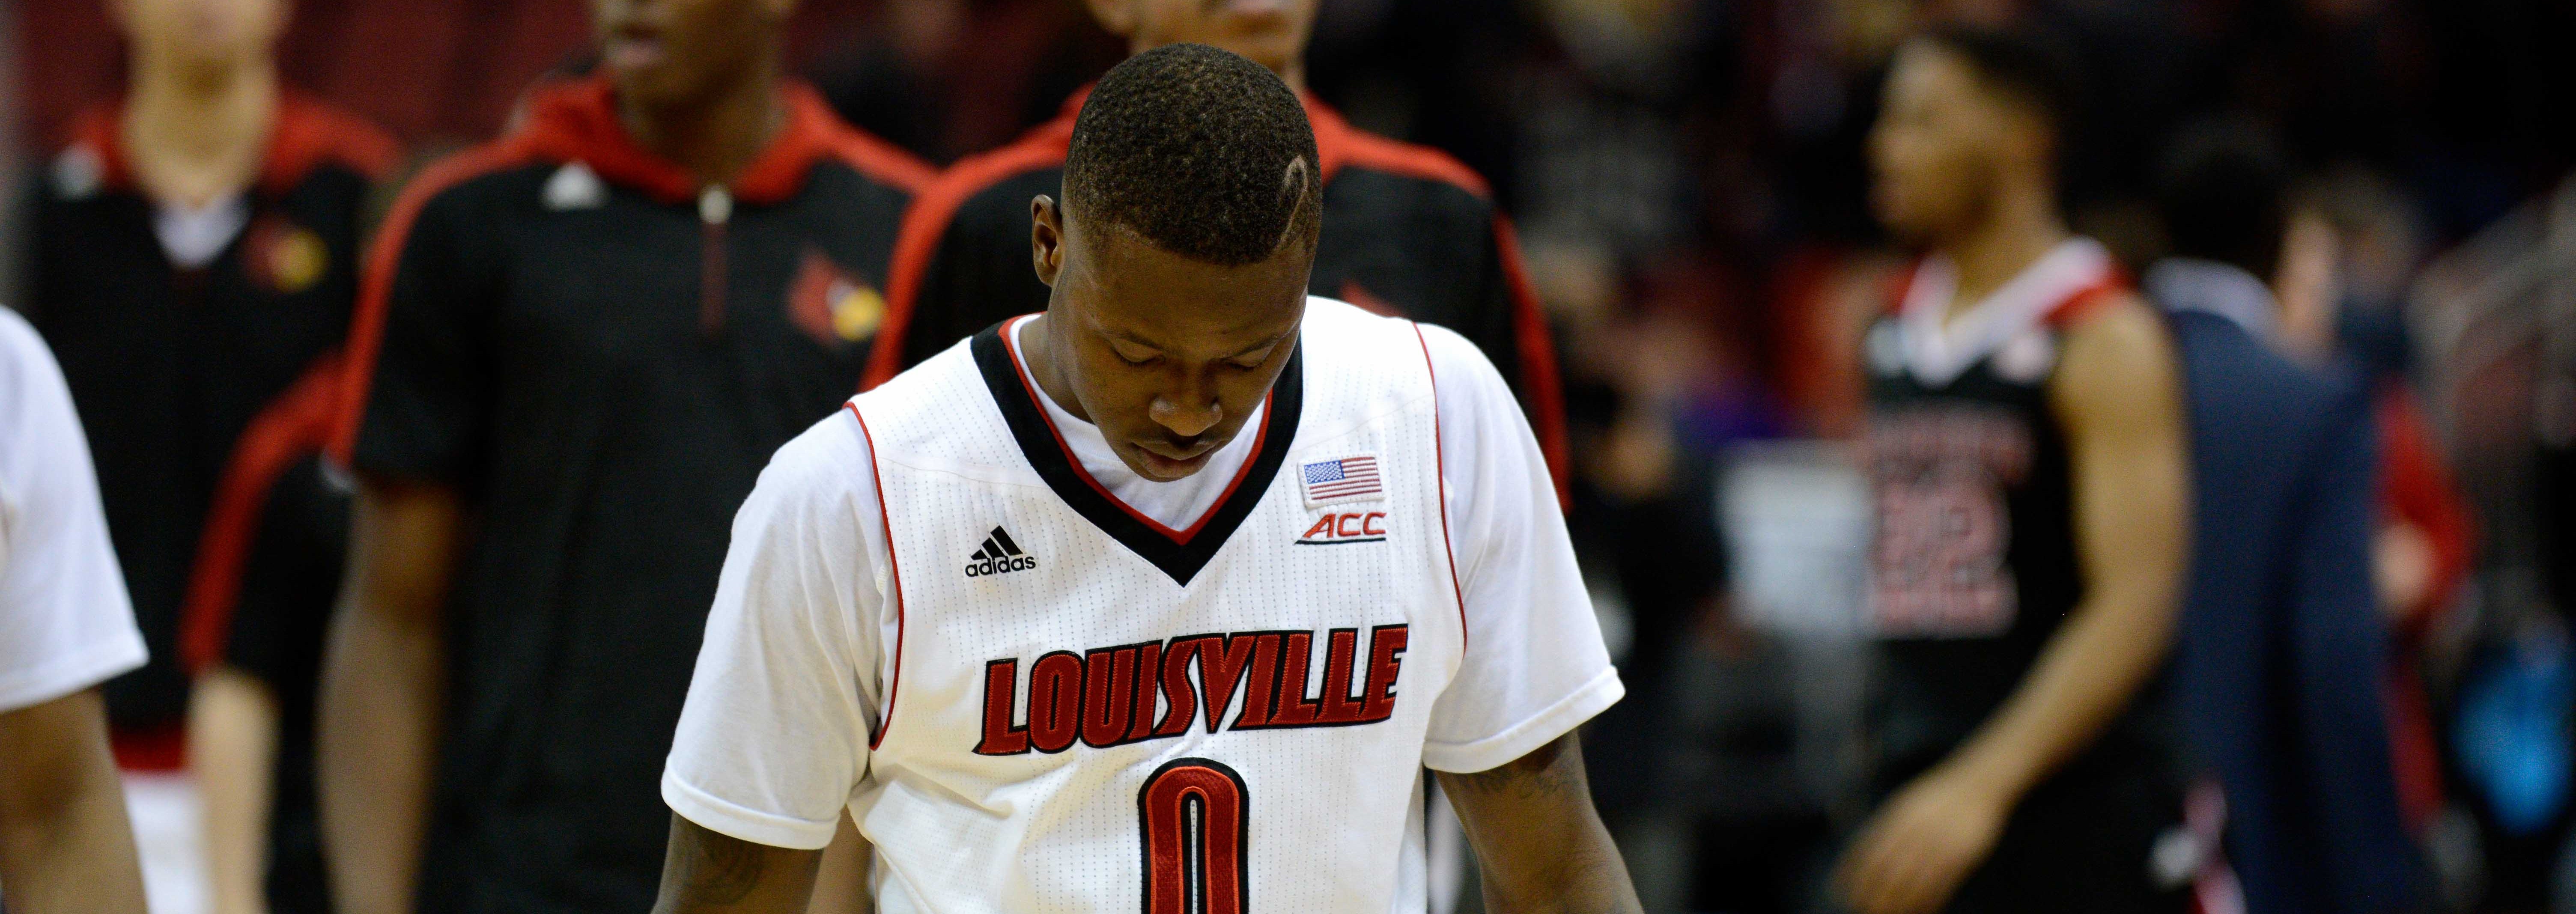 Terry Rozier Louisville vs. NC State 2-14-2015 Photo by Adam Creech Fitted